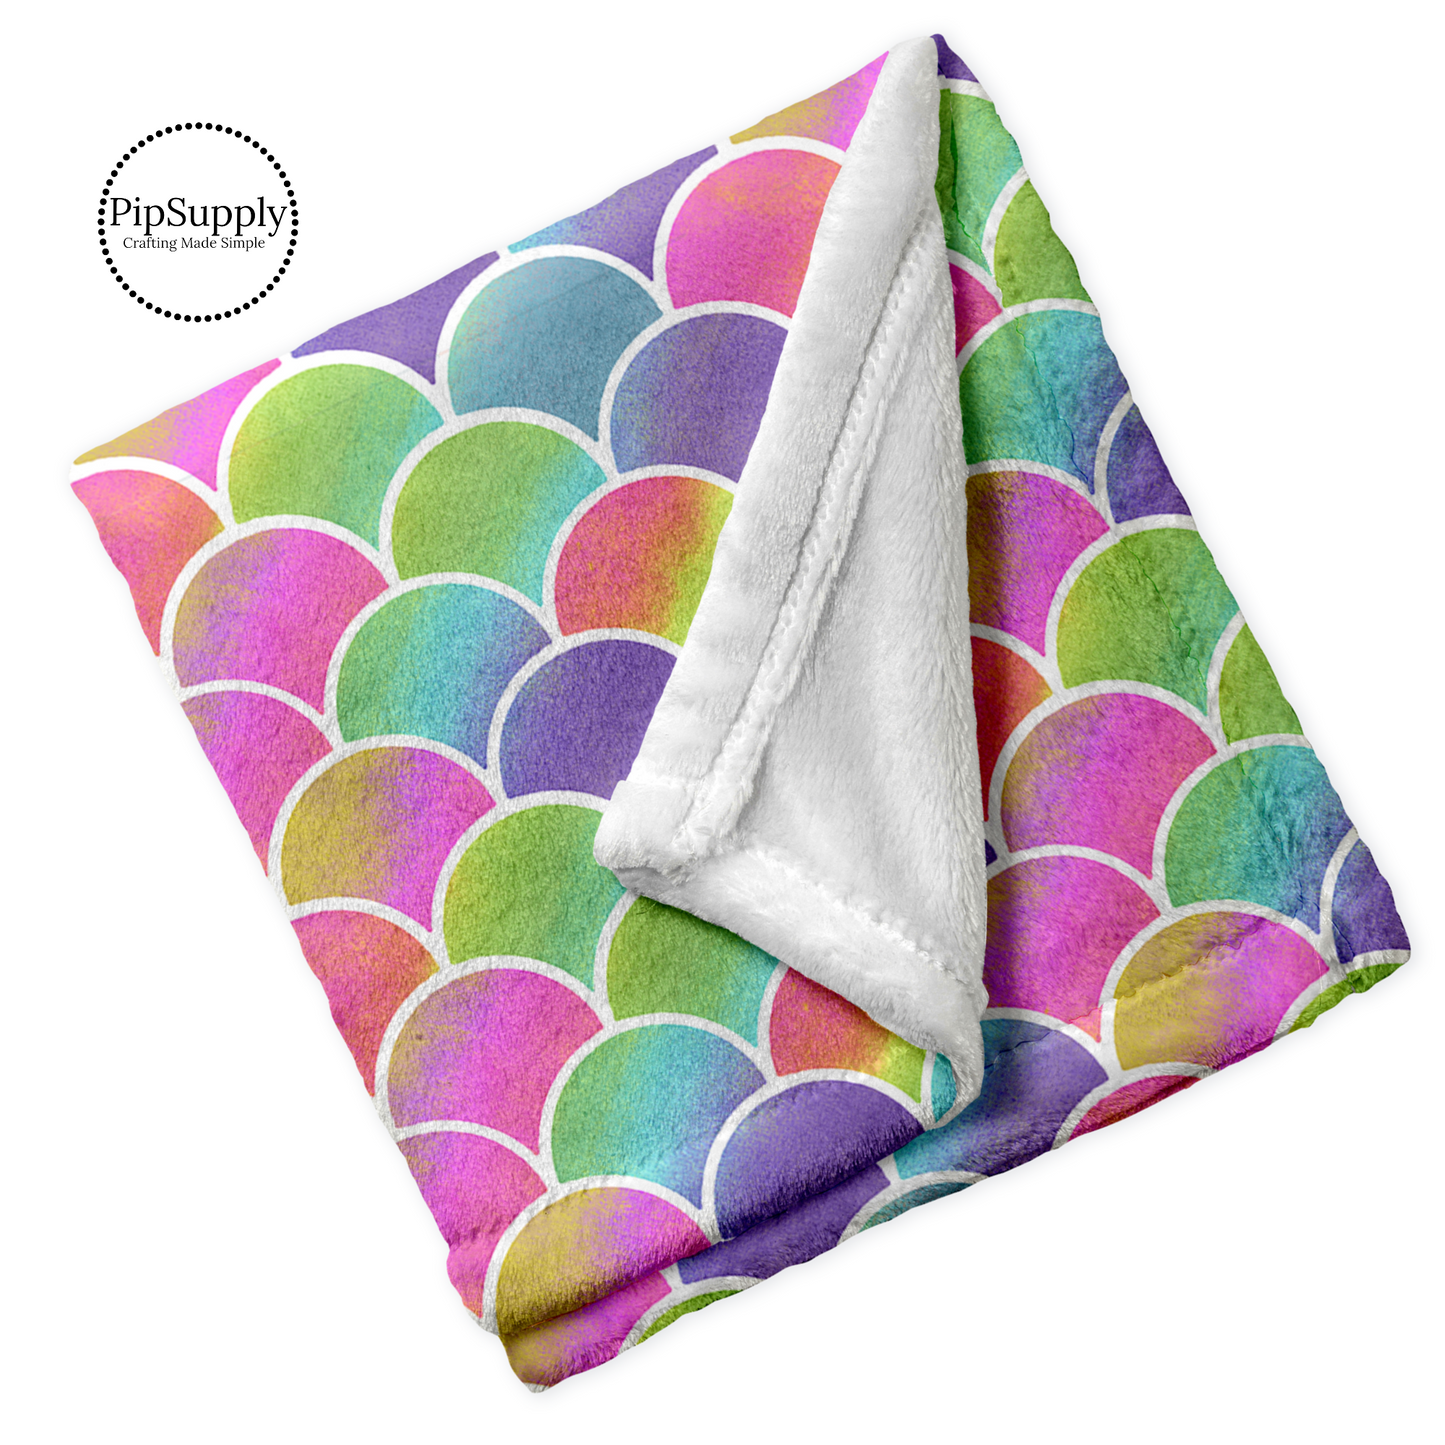 Soft plush folded white minky fur blanket in bright color rainbow scales pattern.